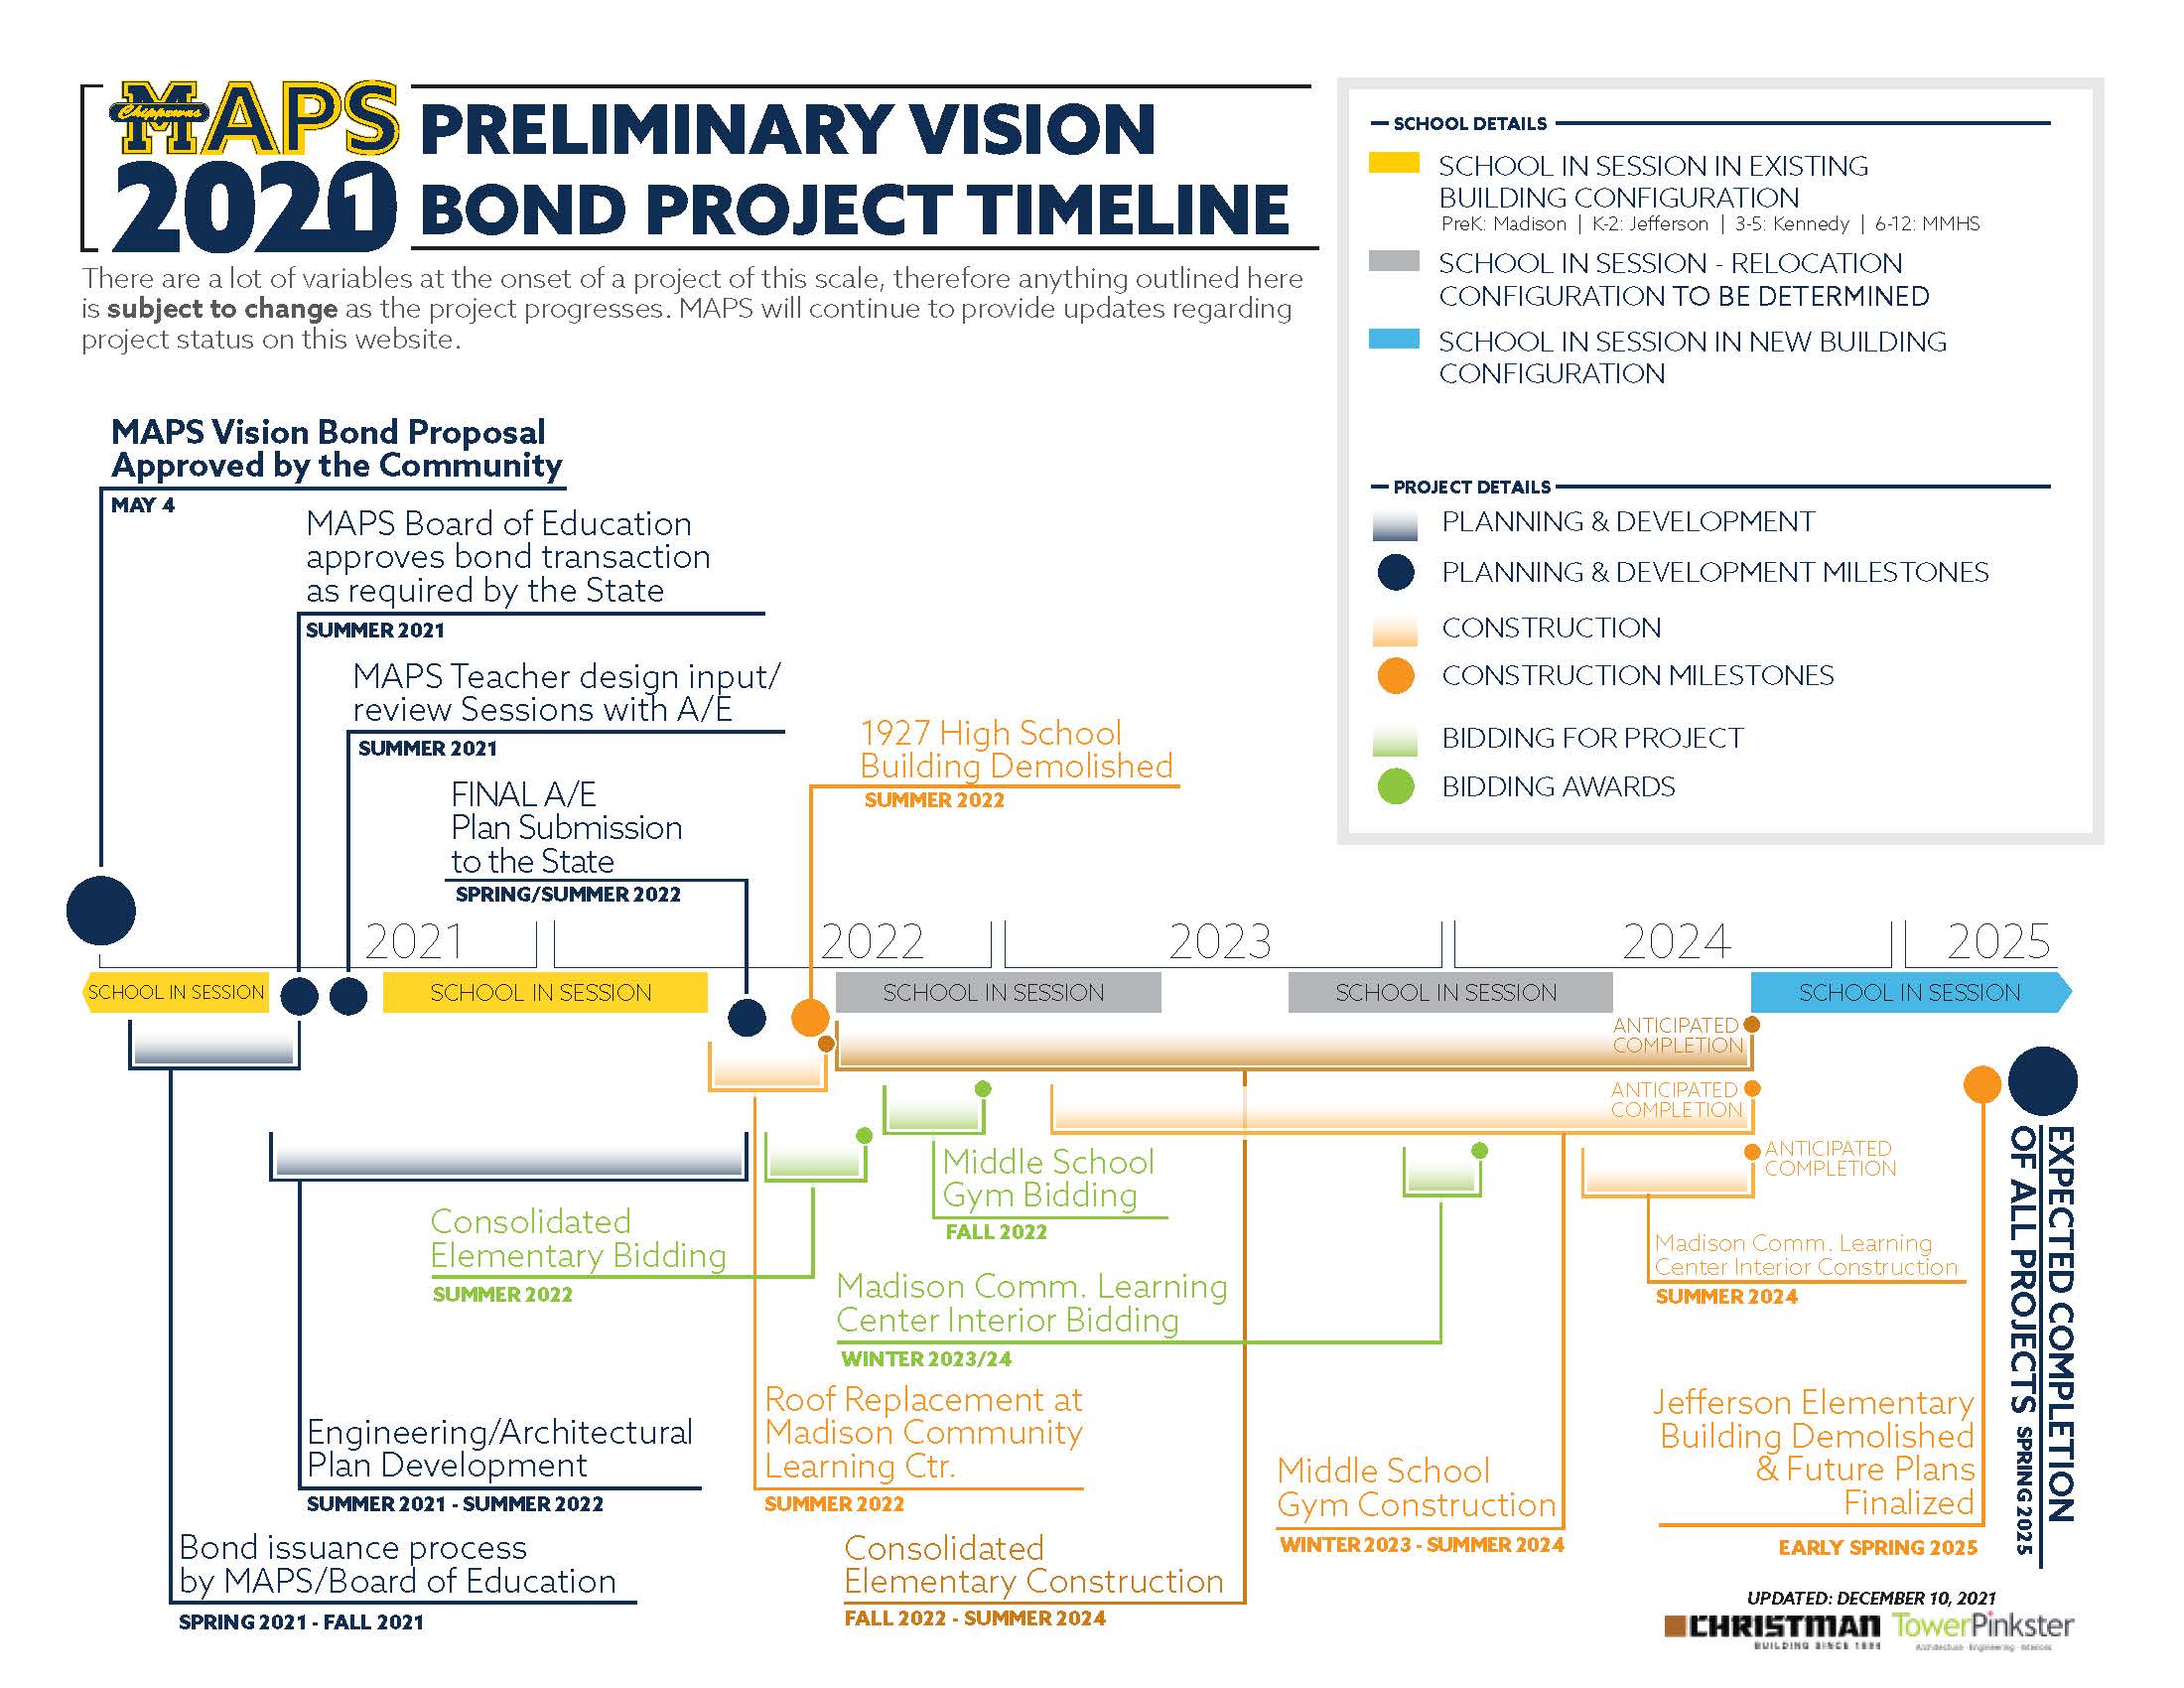 MAPS Vision Plan Timeline Graphic